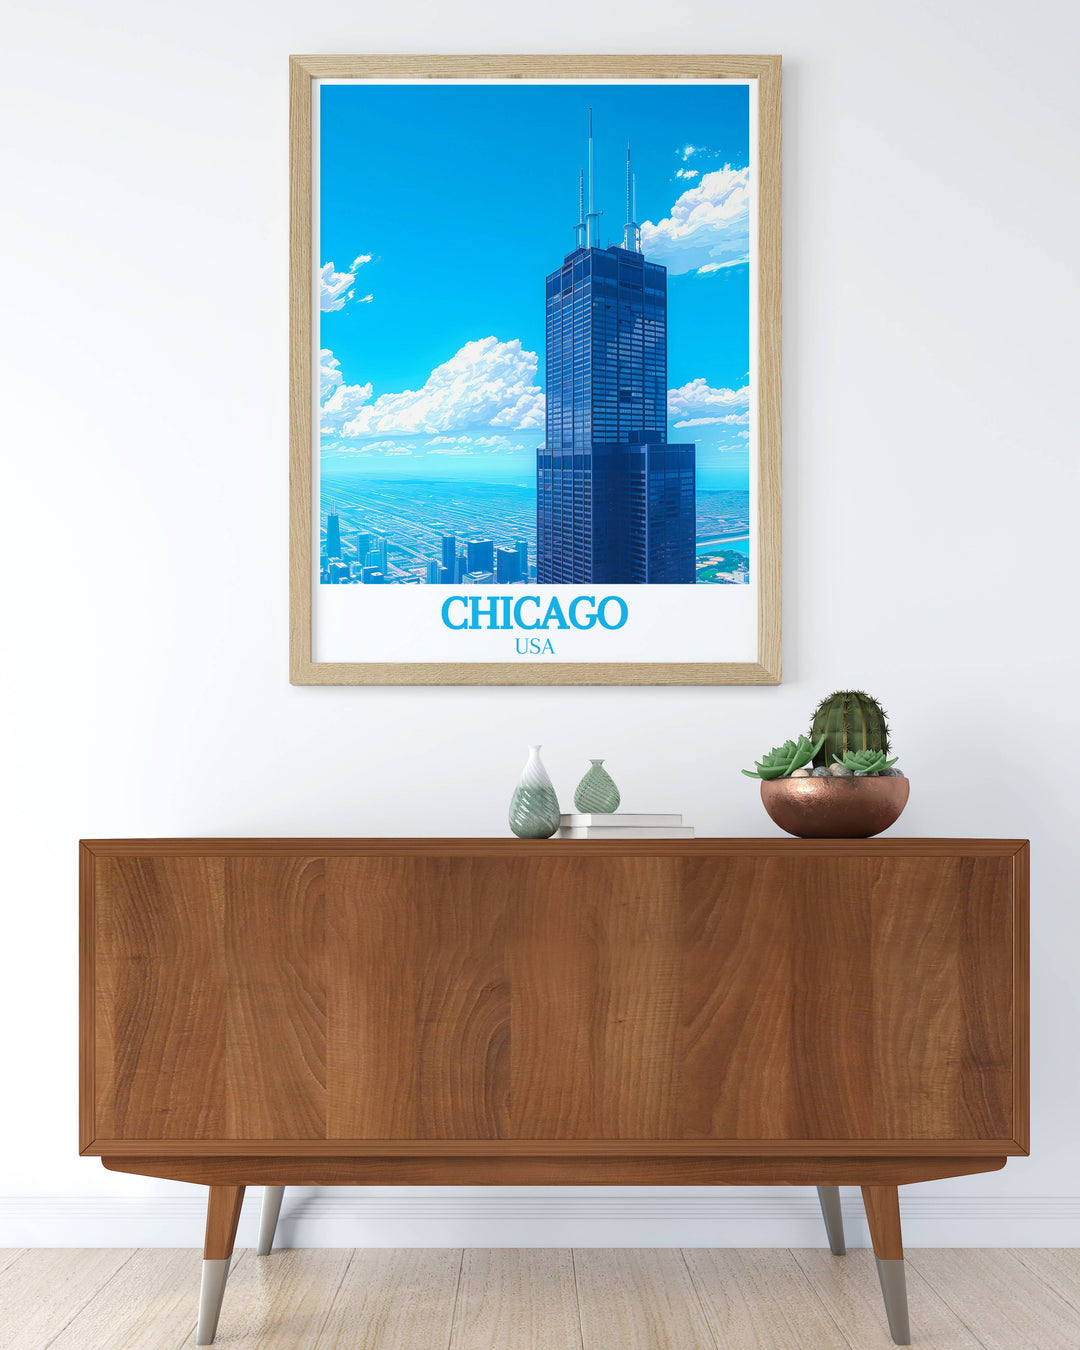 Chicago art print featuring The Willis Tower Formerly Sears Tower in stunning detail. This vibrant and crisp photograph is a great addition to any collection of Chicago wall art and makes a wonderful gift for architecture and travel aficionados.